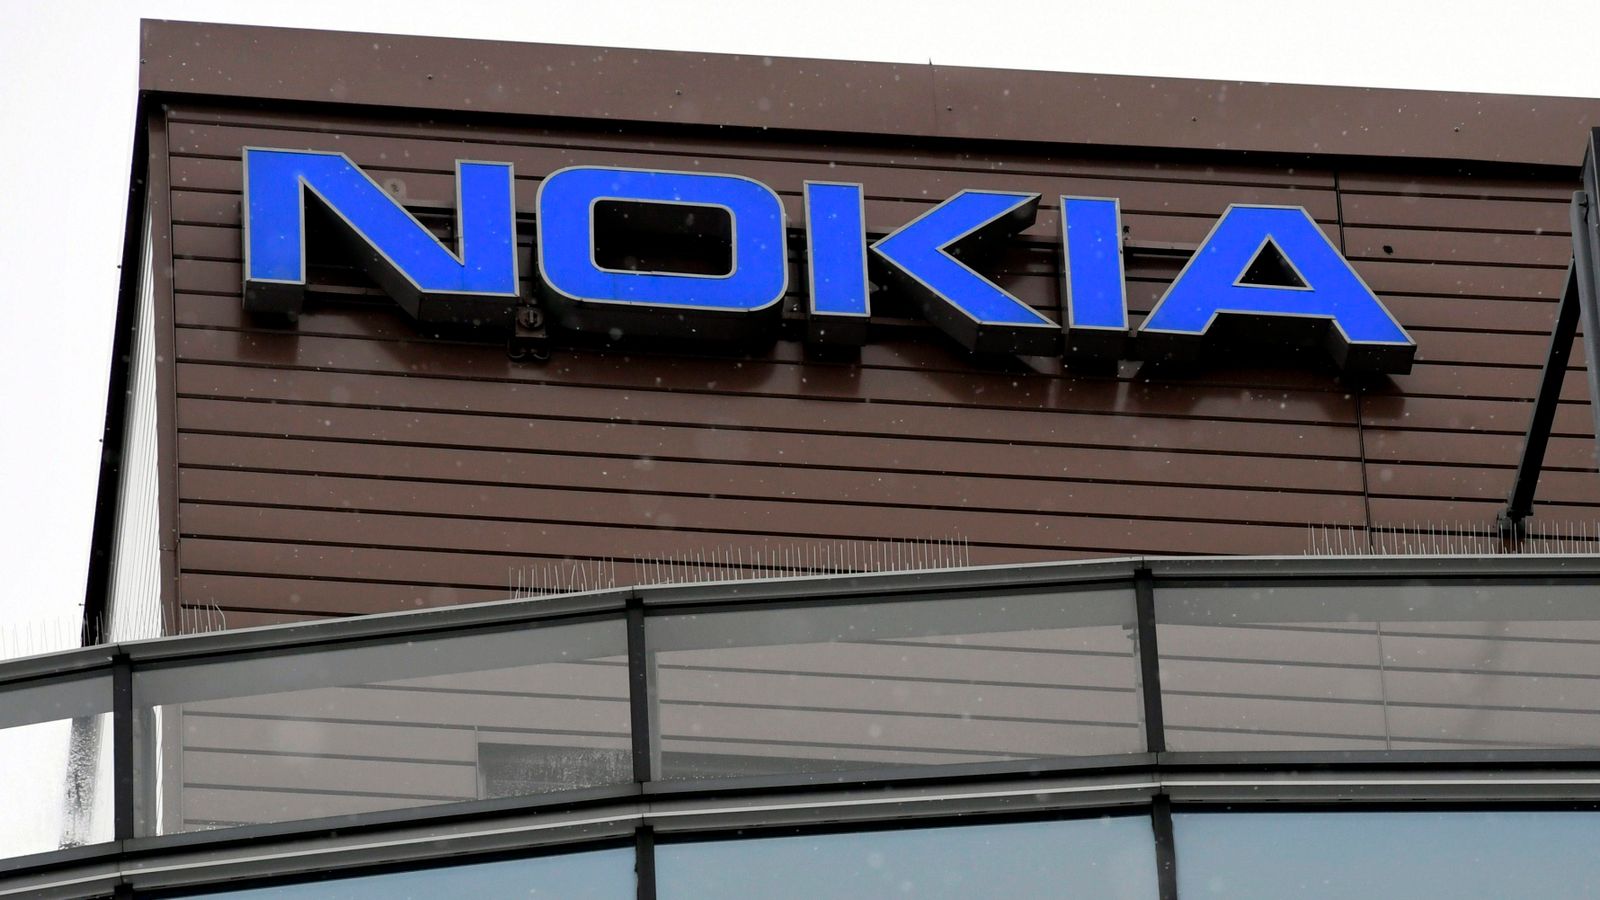 Nokia to cut up to 10,000 jobs as it ploughs investment into battle for